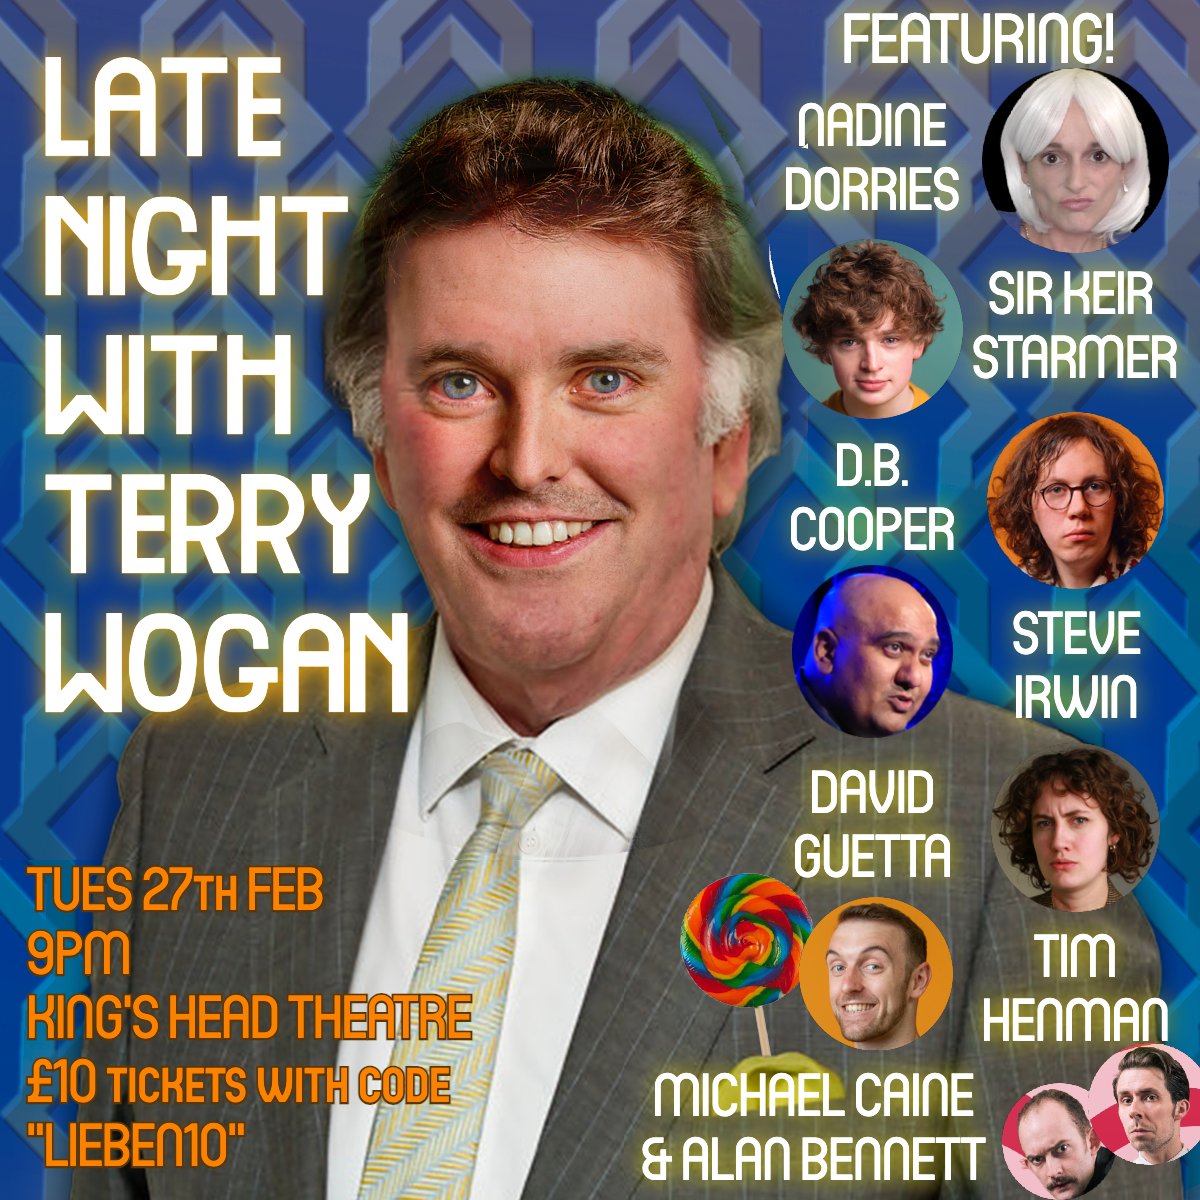 TOMORROW NIGHT Terry Wogan returns to London - this time with too many acts! The King's Head (Theatre) will roll for this! £10 tickets with code LIEBEN10 at checkout kingsheadtheatre.com/whats-on/liebe…